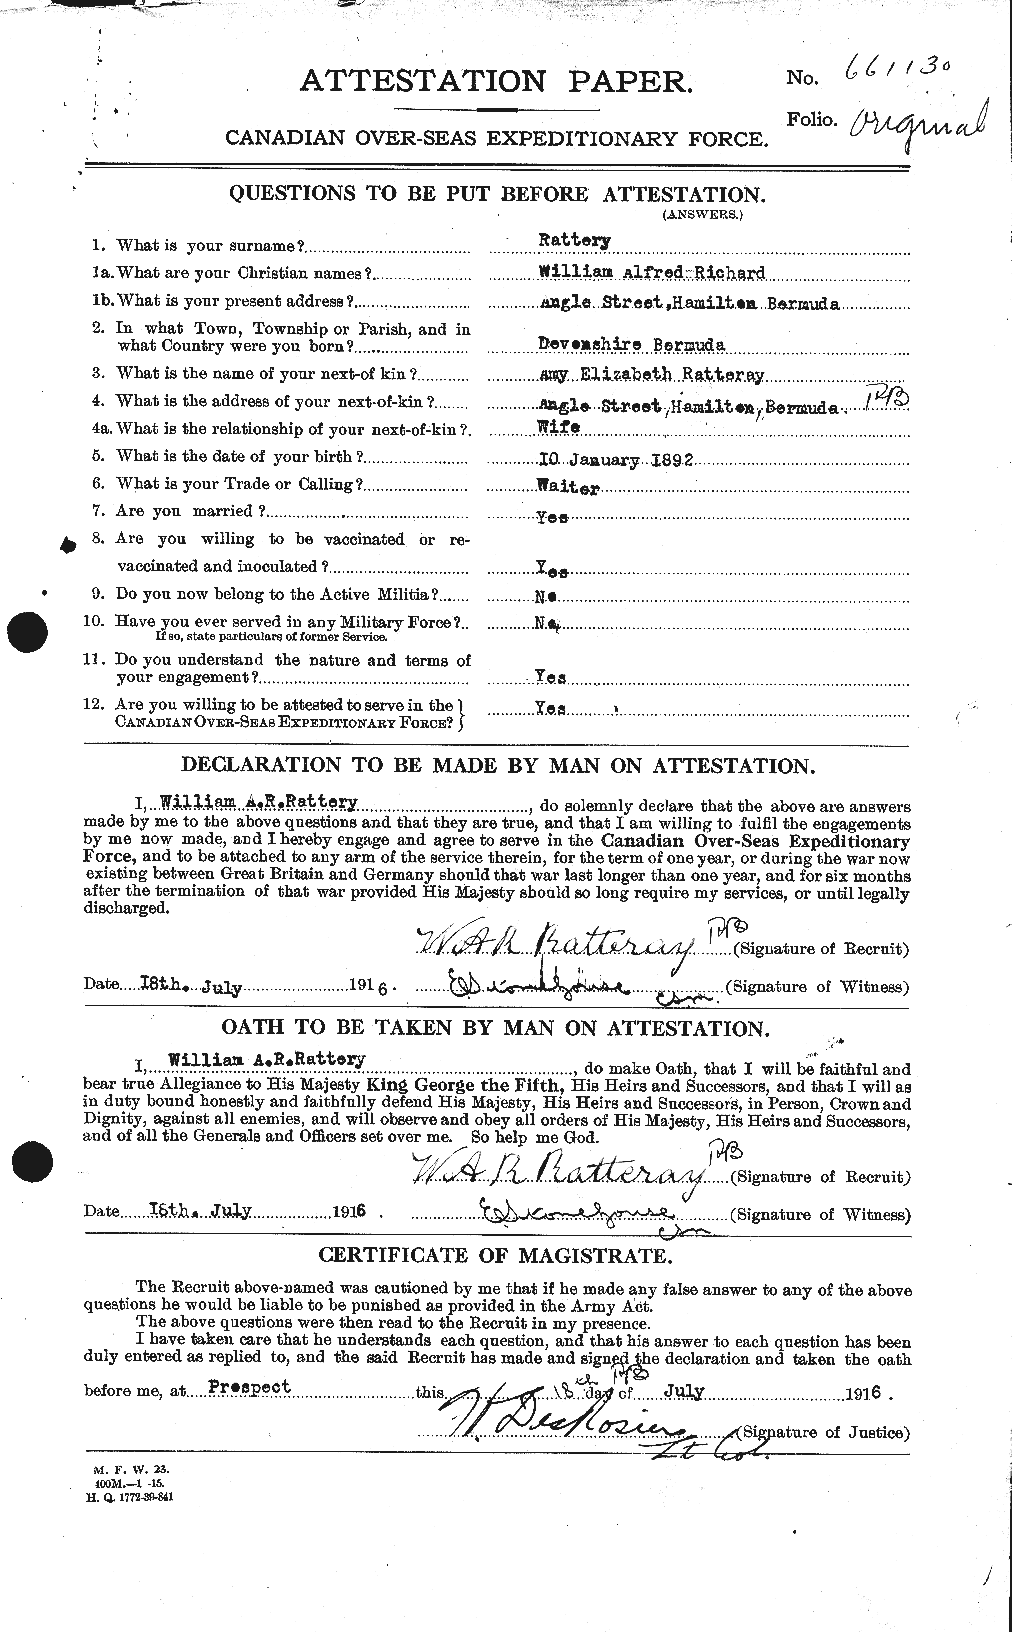 Personnel Records of the First World War - CEF 595672a